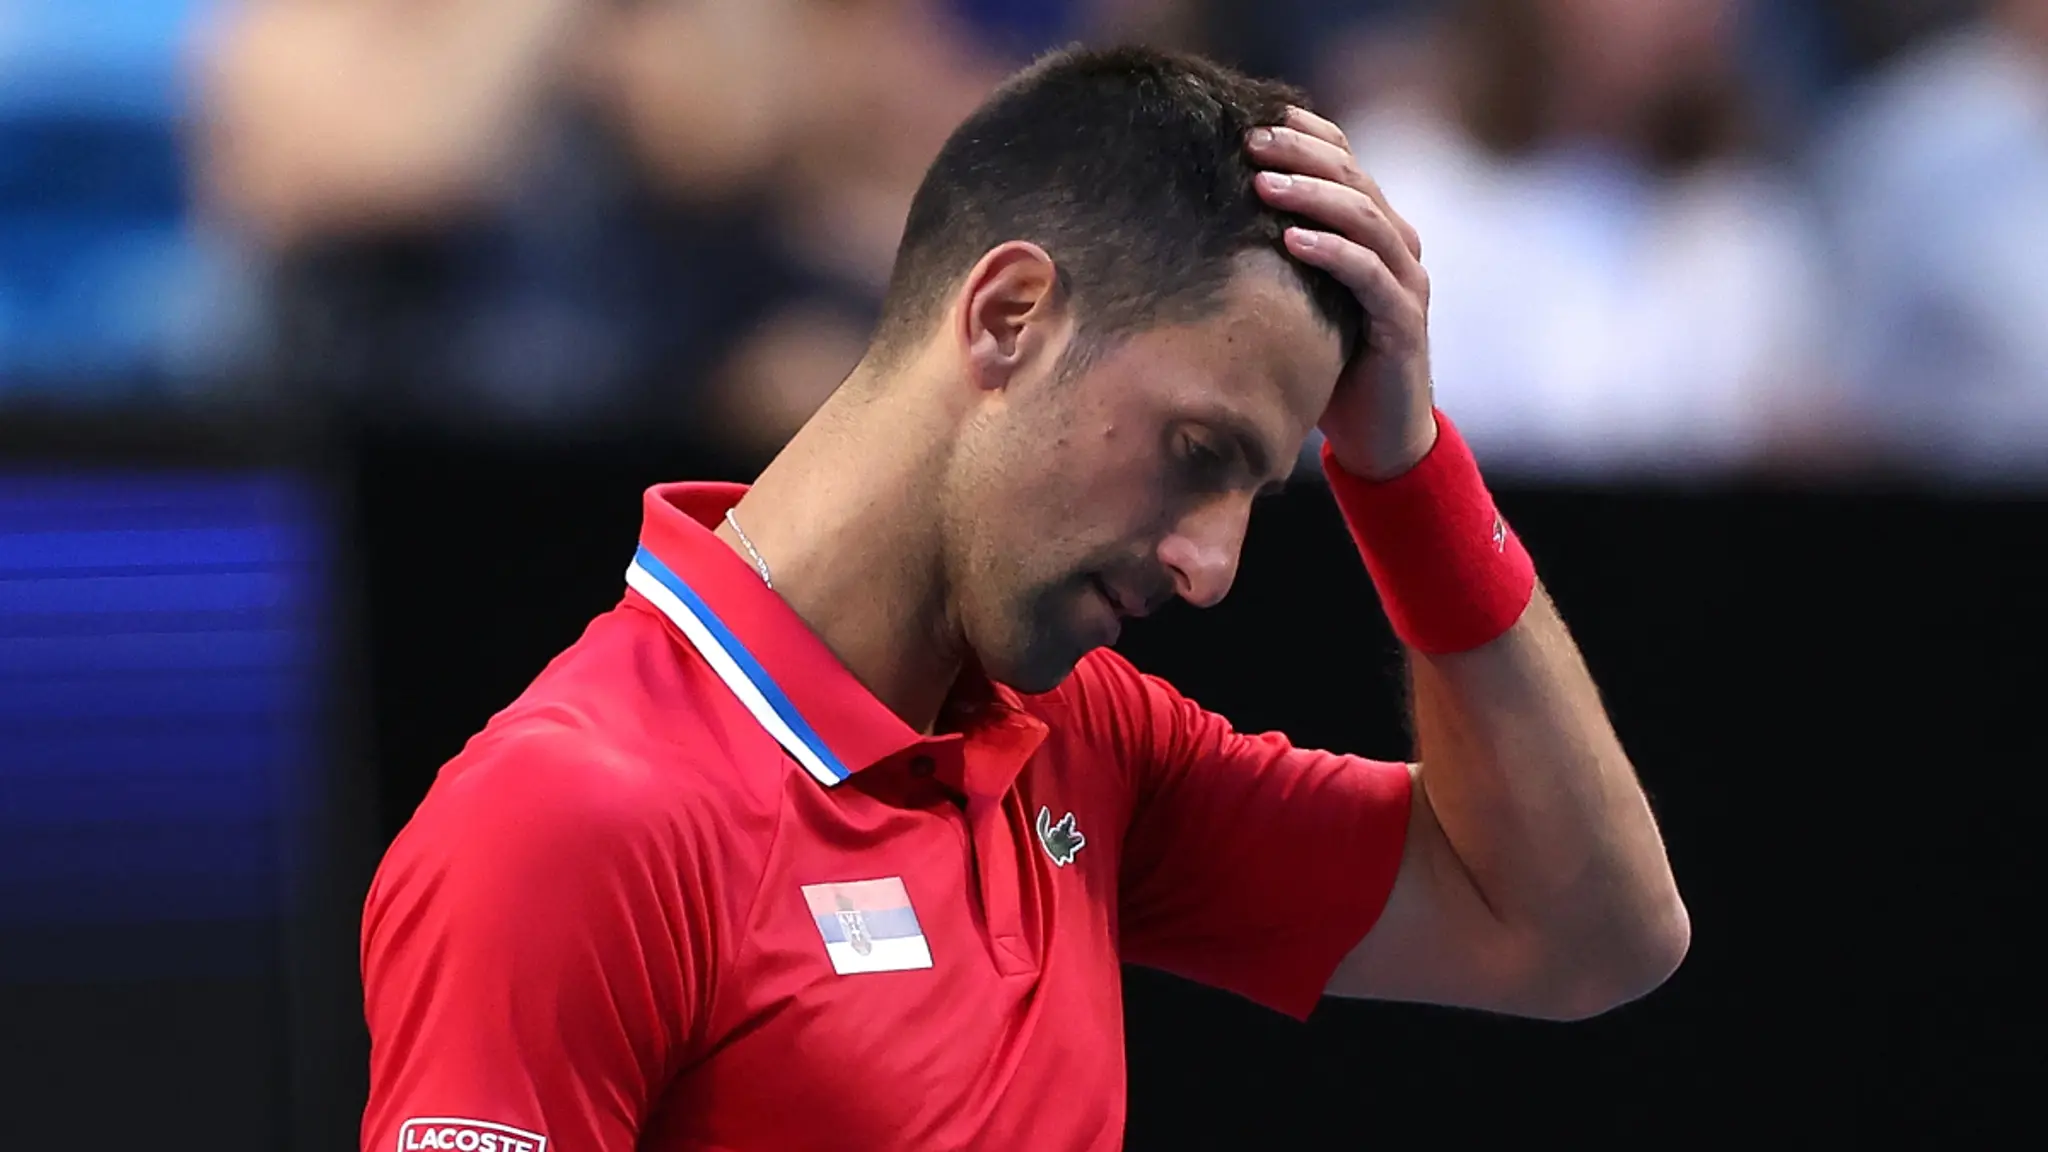 The severity of Djokovic's wrist injury has progressed to a critical stage